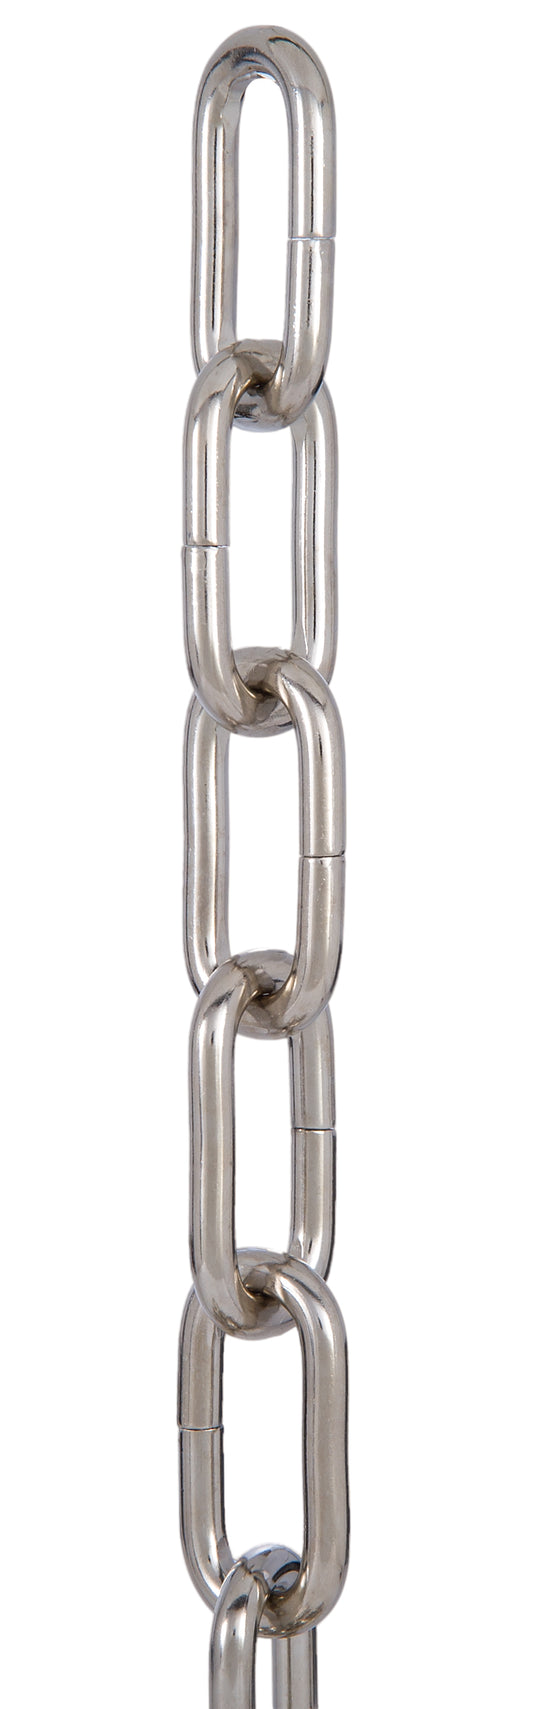 Nickel Plated Finish, 0 Gauge Heavy Duty Steel Chain for Larger Fixtures